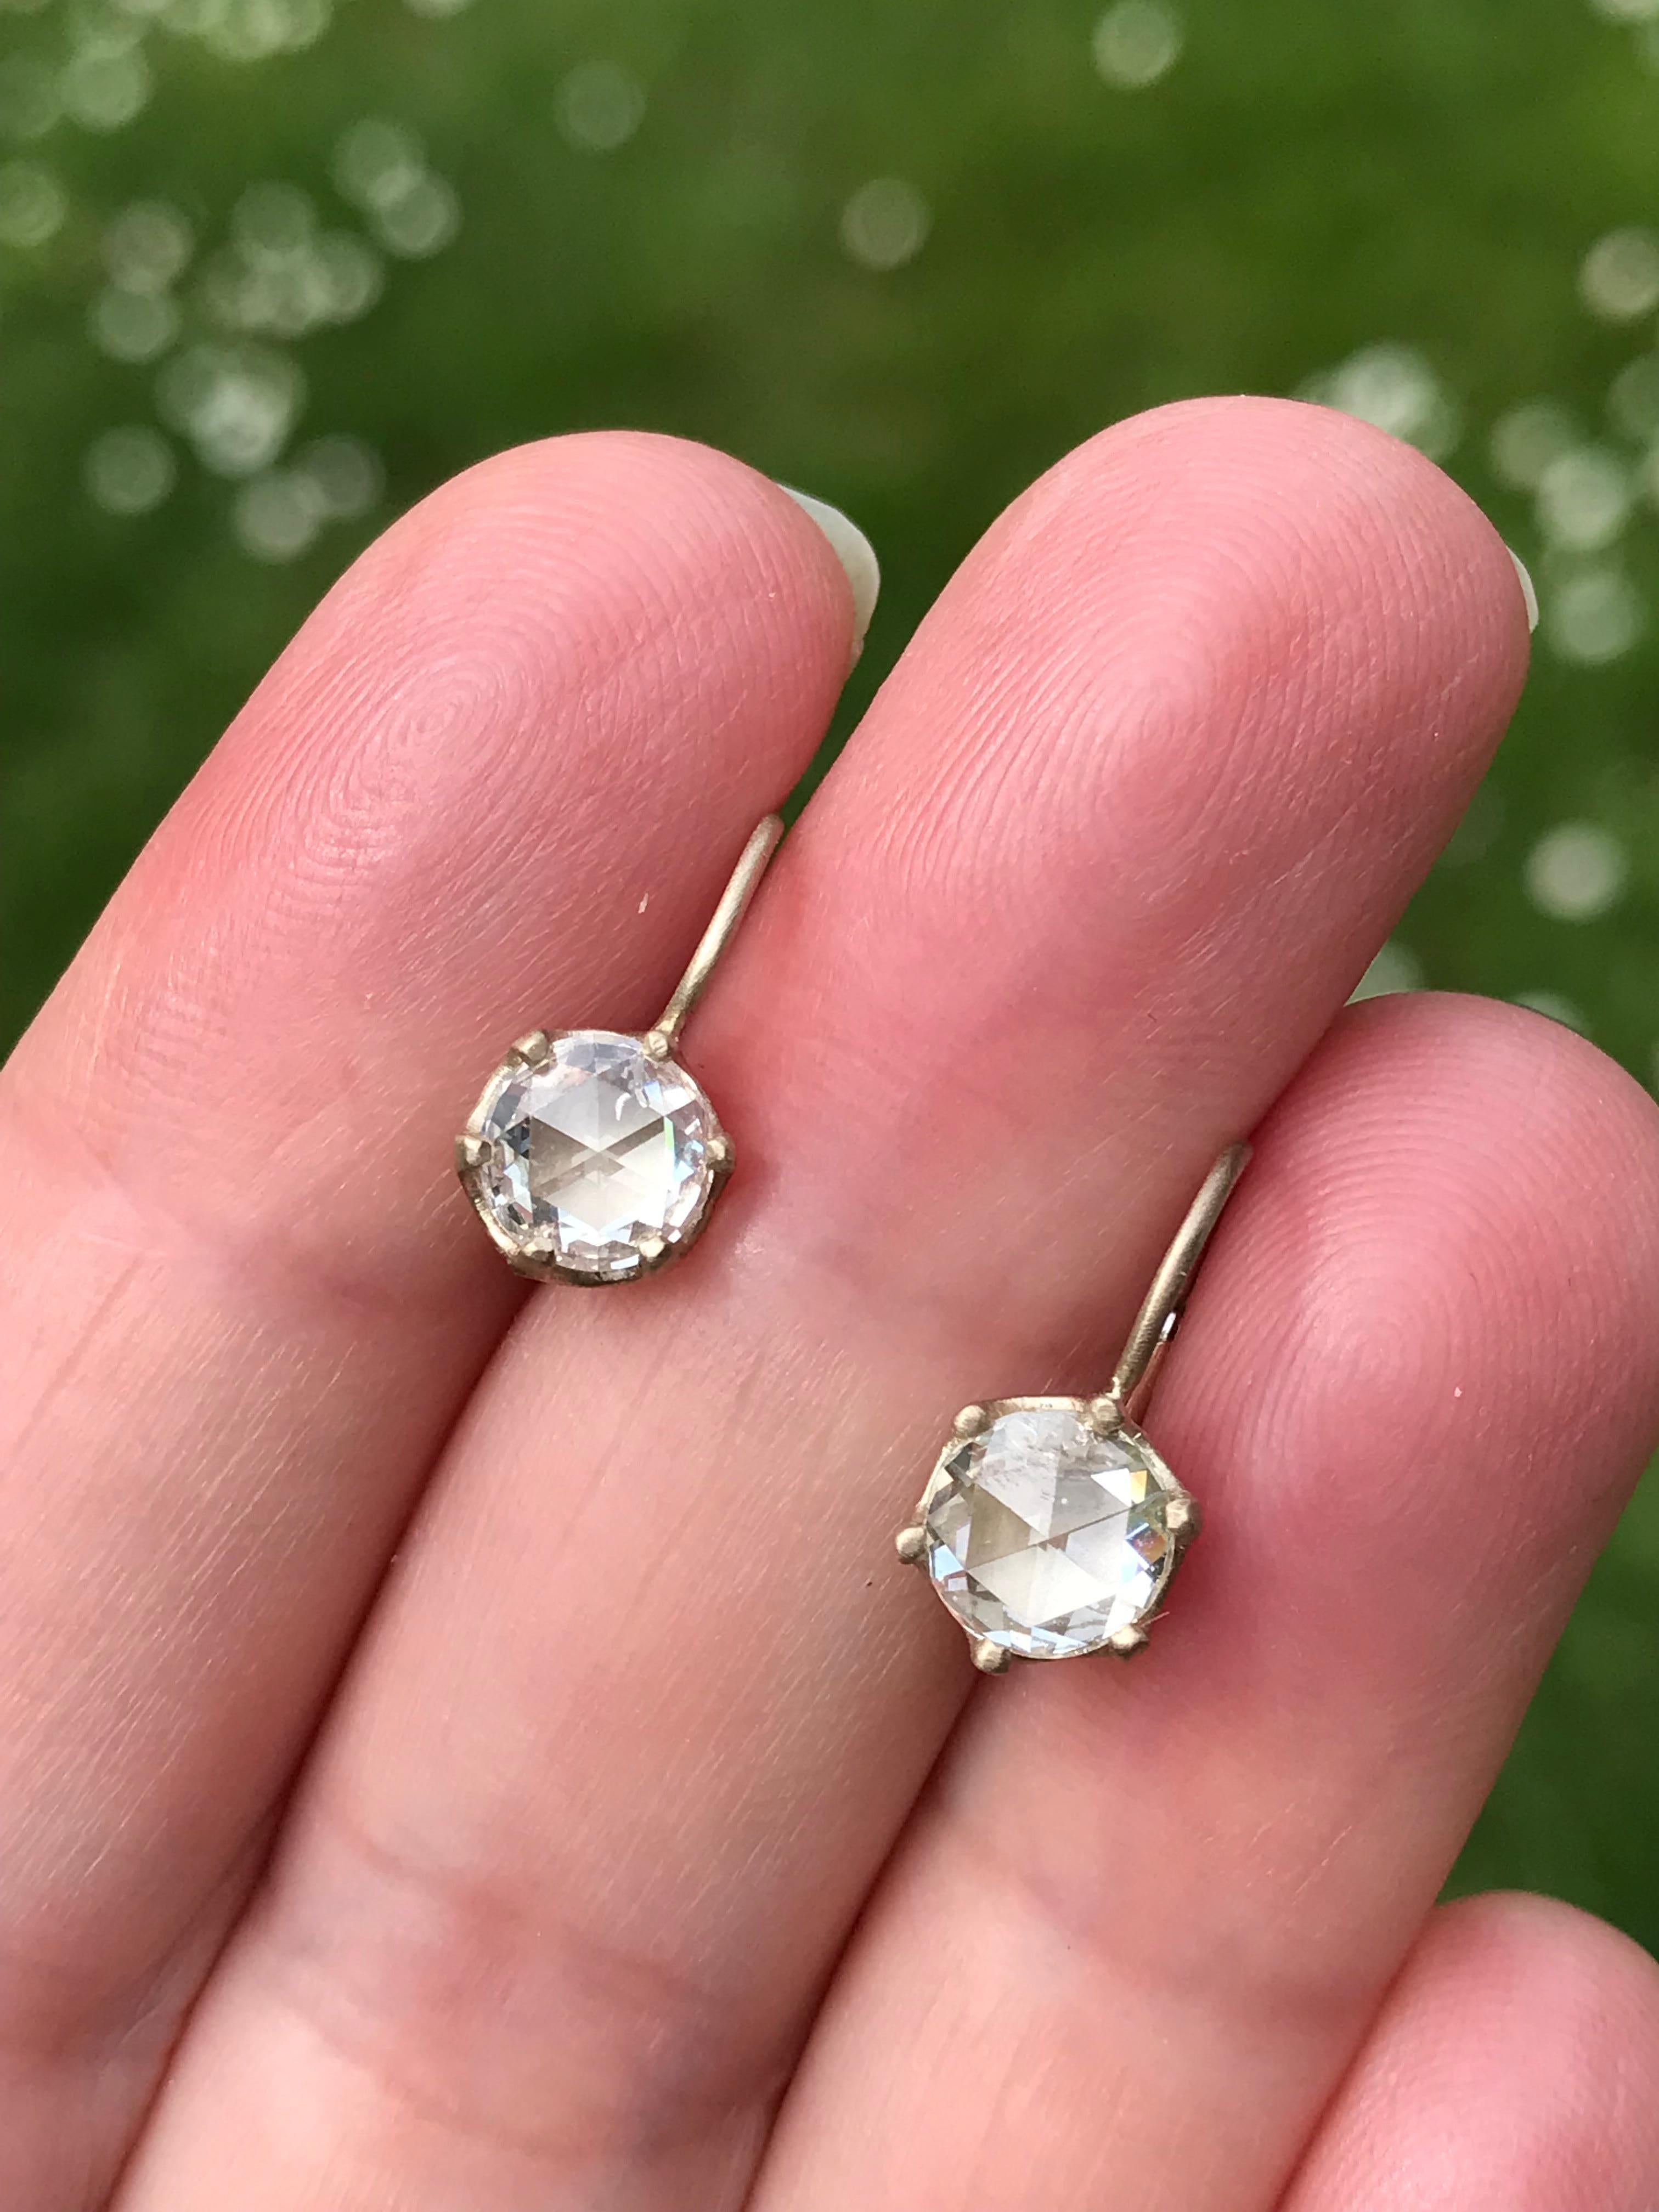 Dalben design diamond drop earrings mounted in 18 kt white gold with 2 white round rose cut diamonds total weight 1,43 carat.
Earrings dimension:
max width 6,7 mm ,
height without leverback 6,3 mm
height with leverback 14,6 mm
The Earrings are